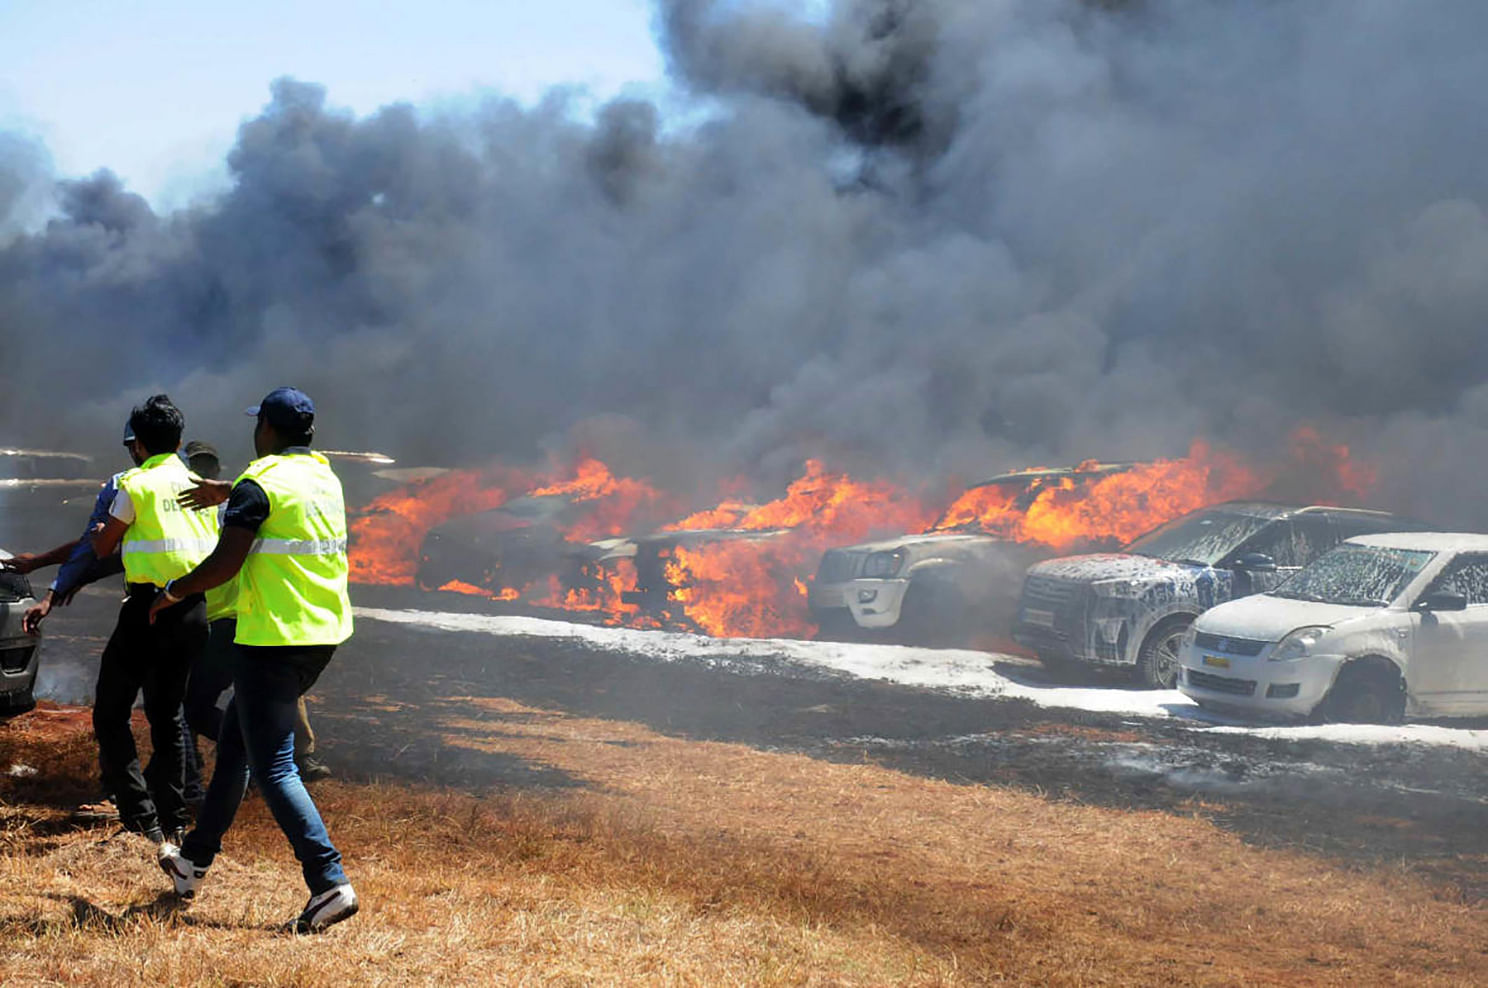 About 300 cars were gutted when a fire raged through dry grass at the Aero India parking area last Saturday.